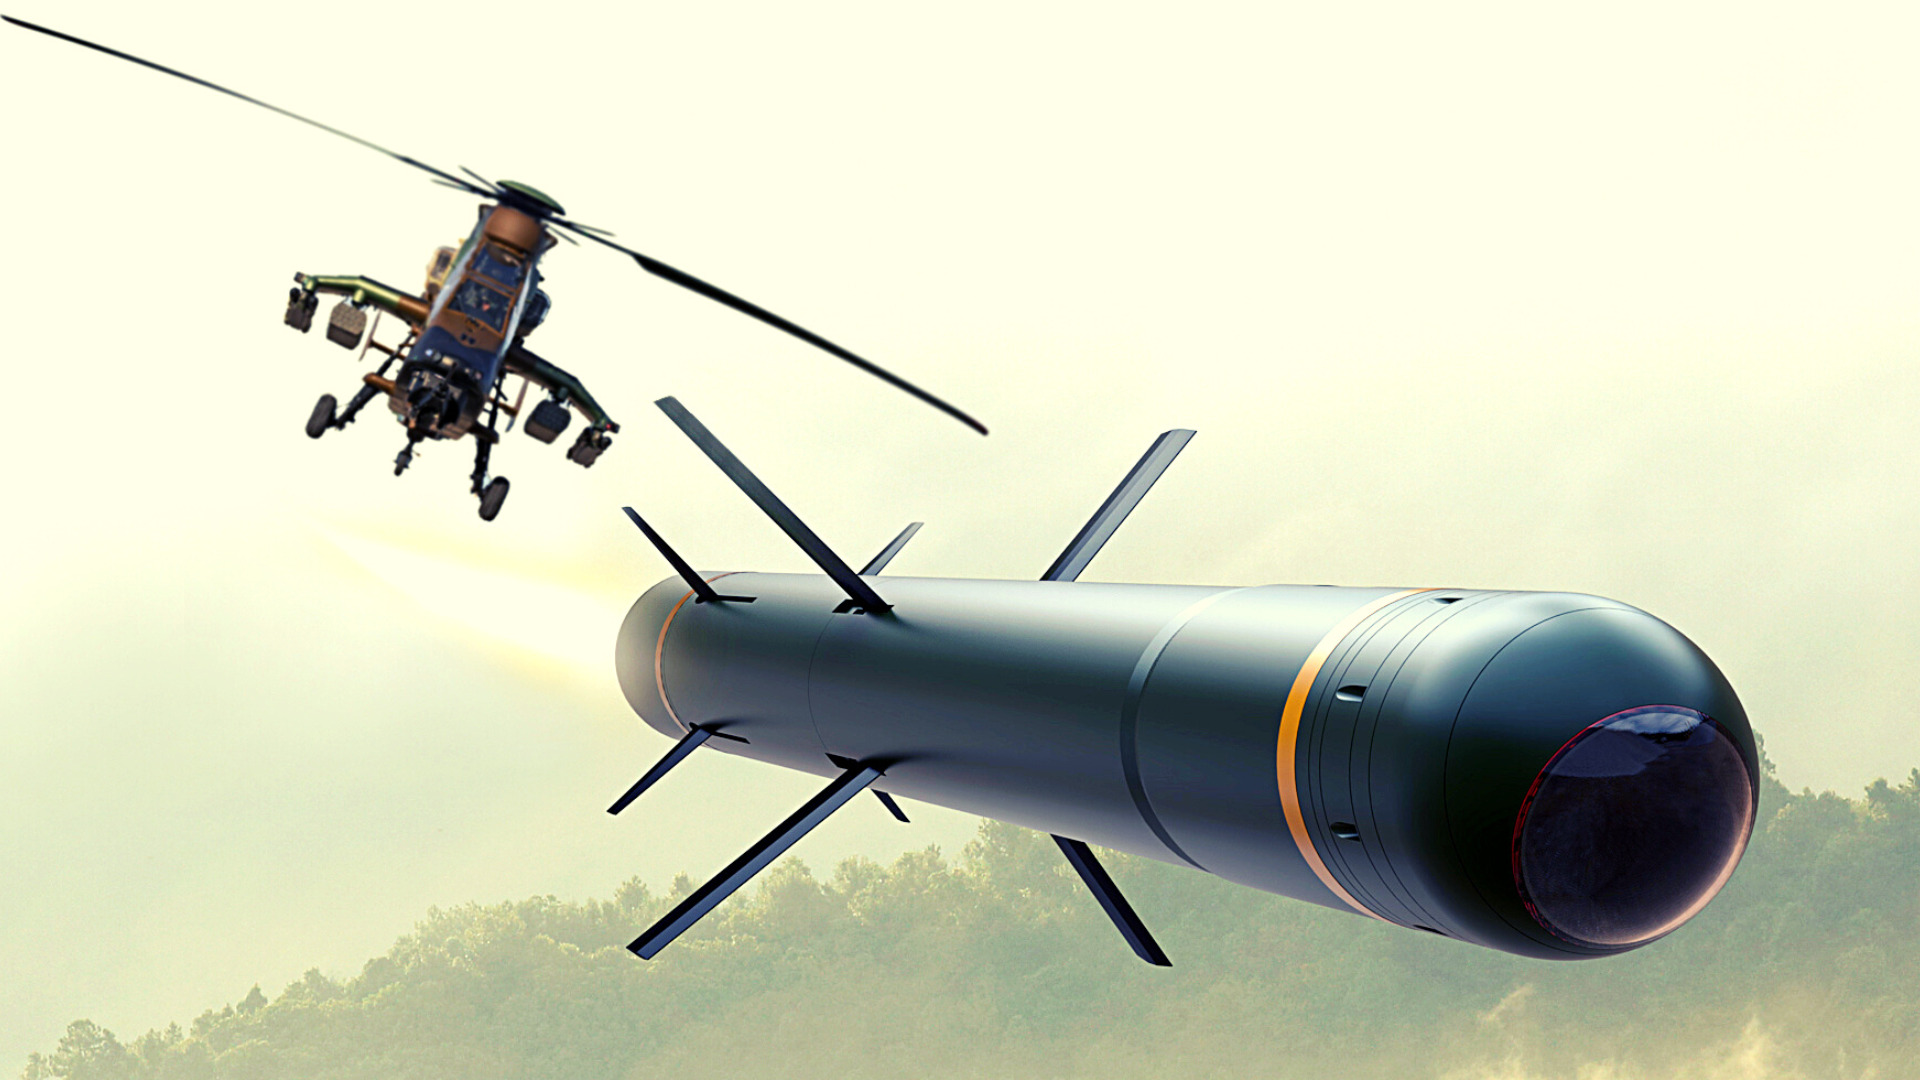 Missile MBDA // Source : https://newsroom.mbda-systems.com/mbda-to-develop-the-combat-missile-for-the-tiger-helicopter-2/